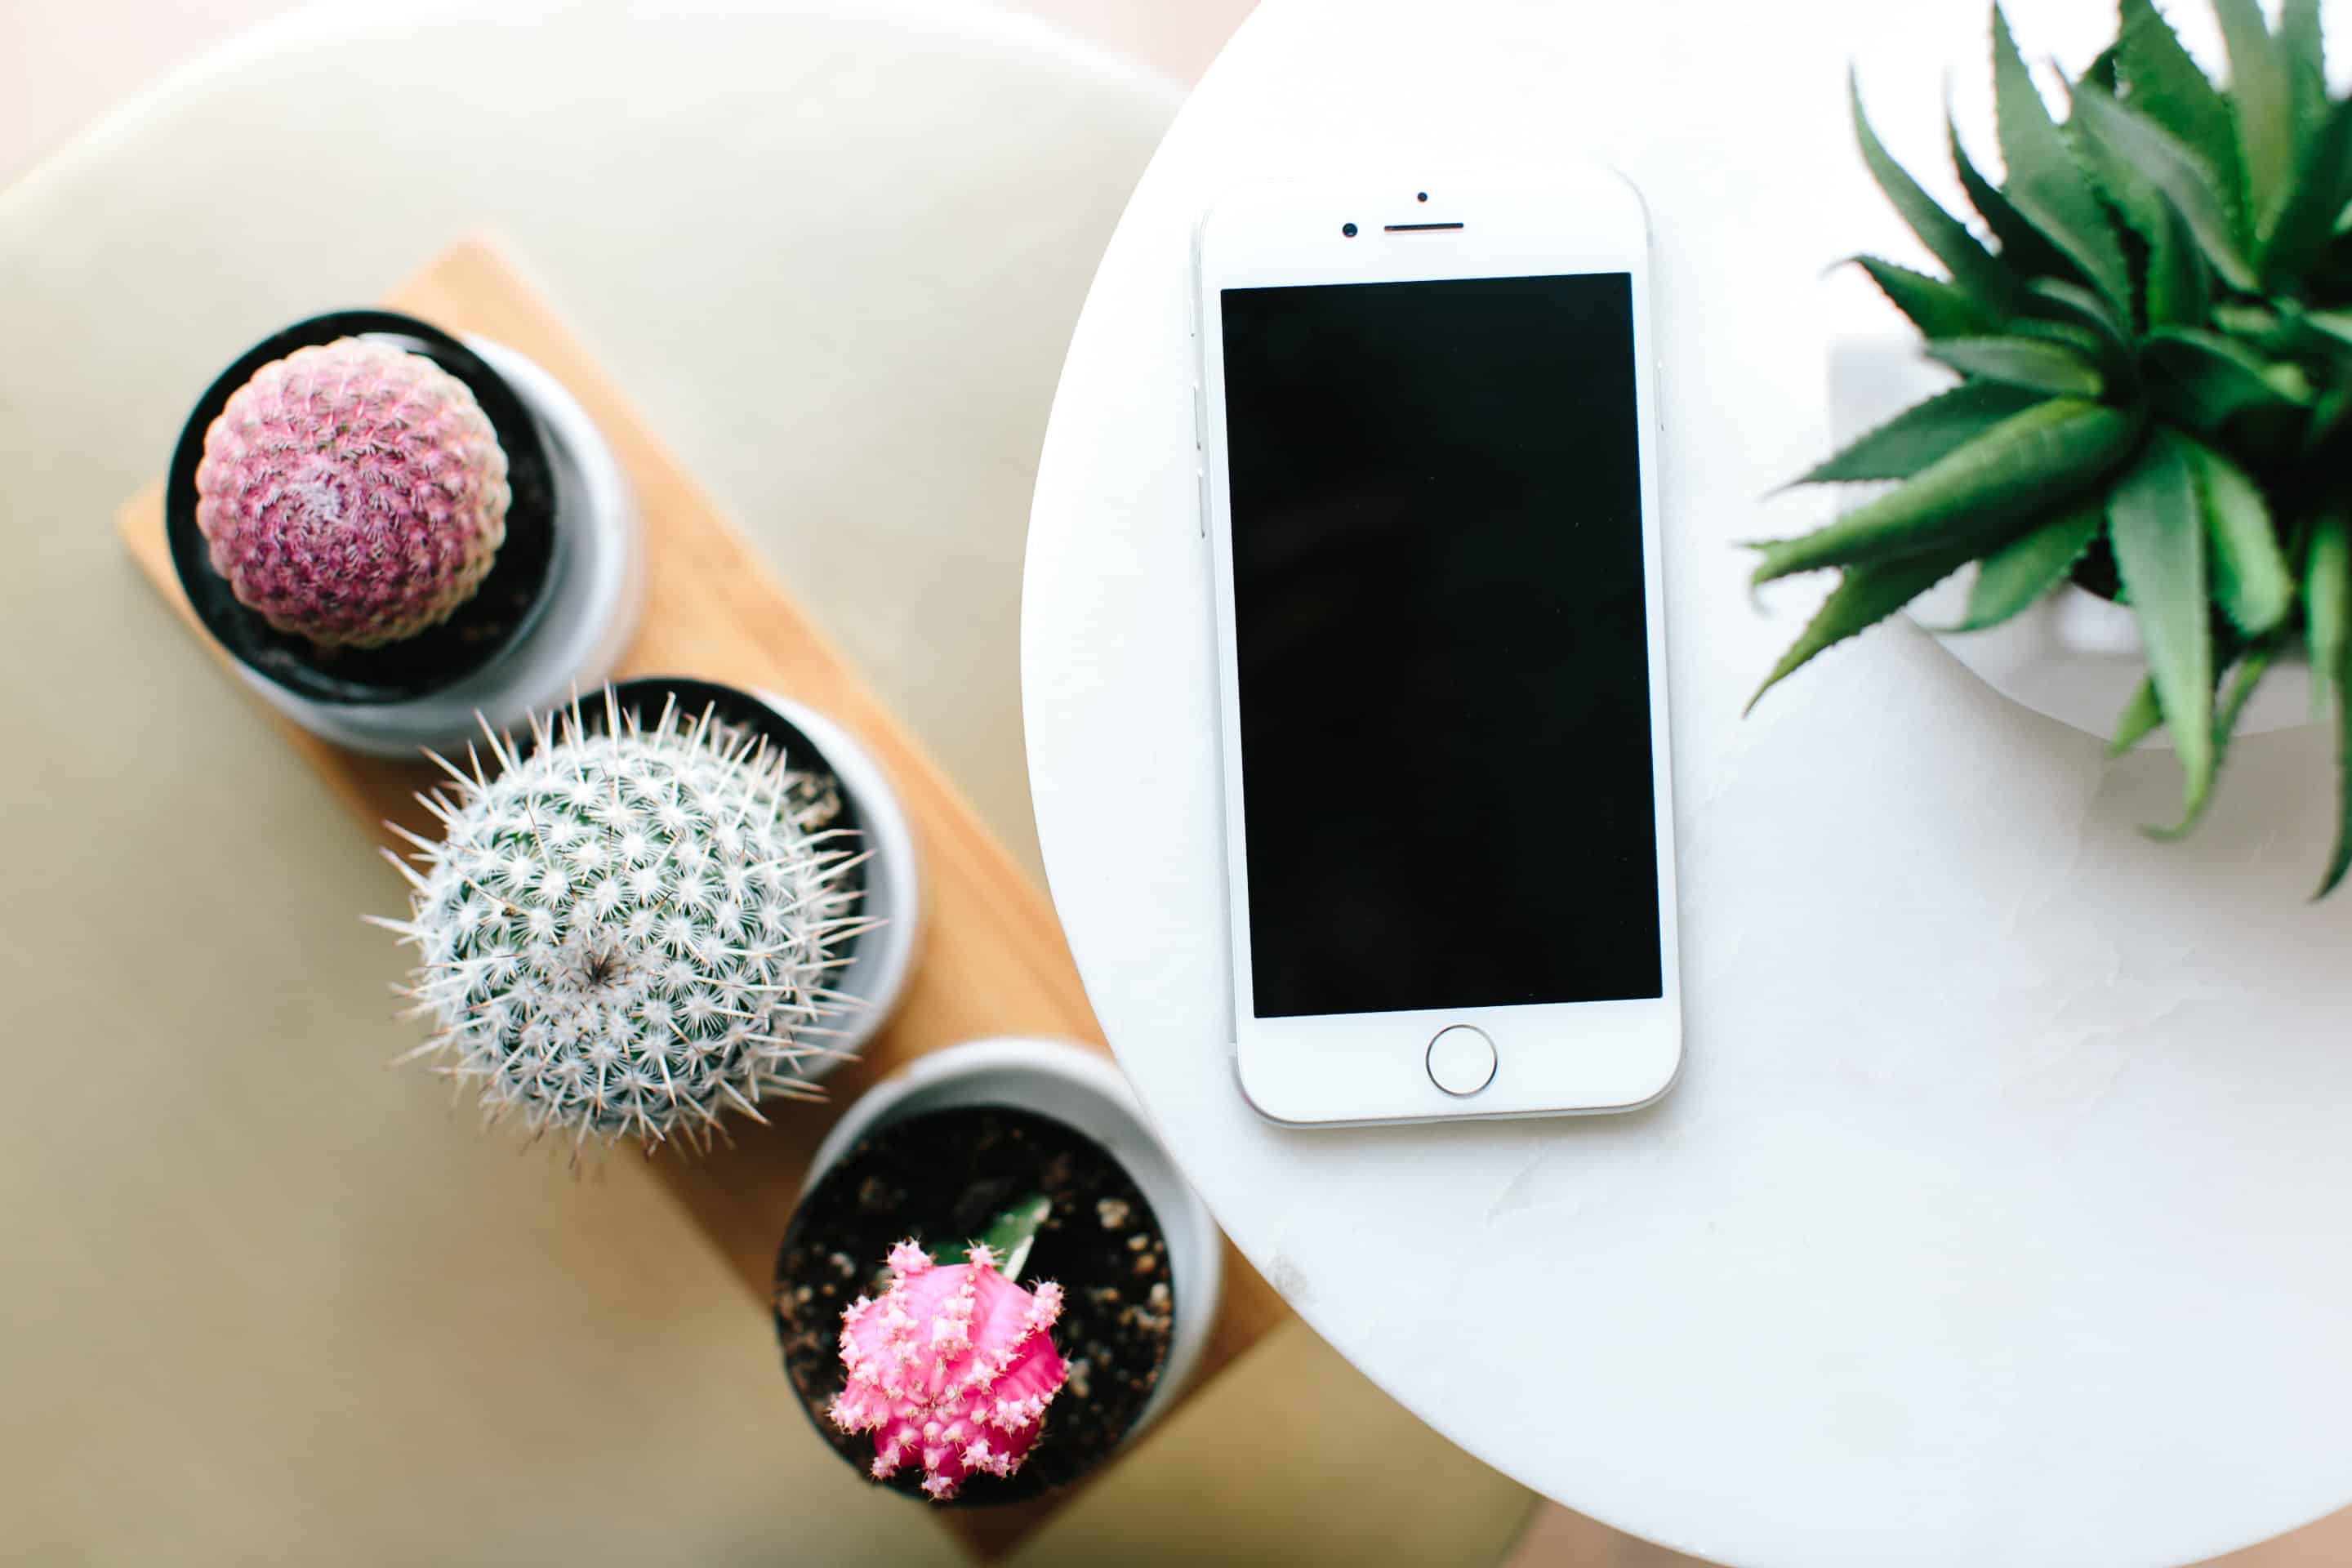 Mobile phone sitting on white desk next to variations of pink and green cactuses